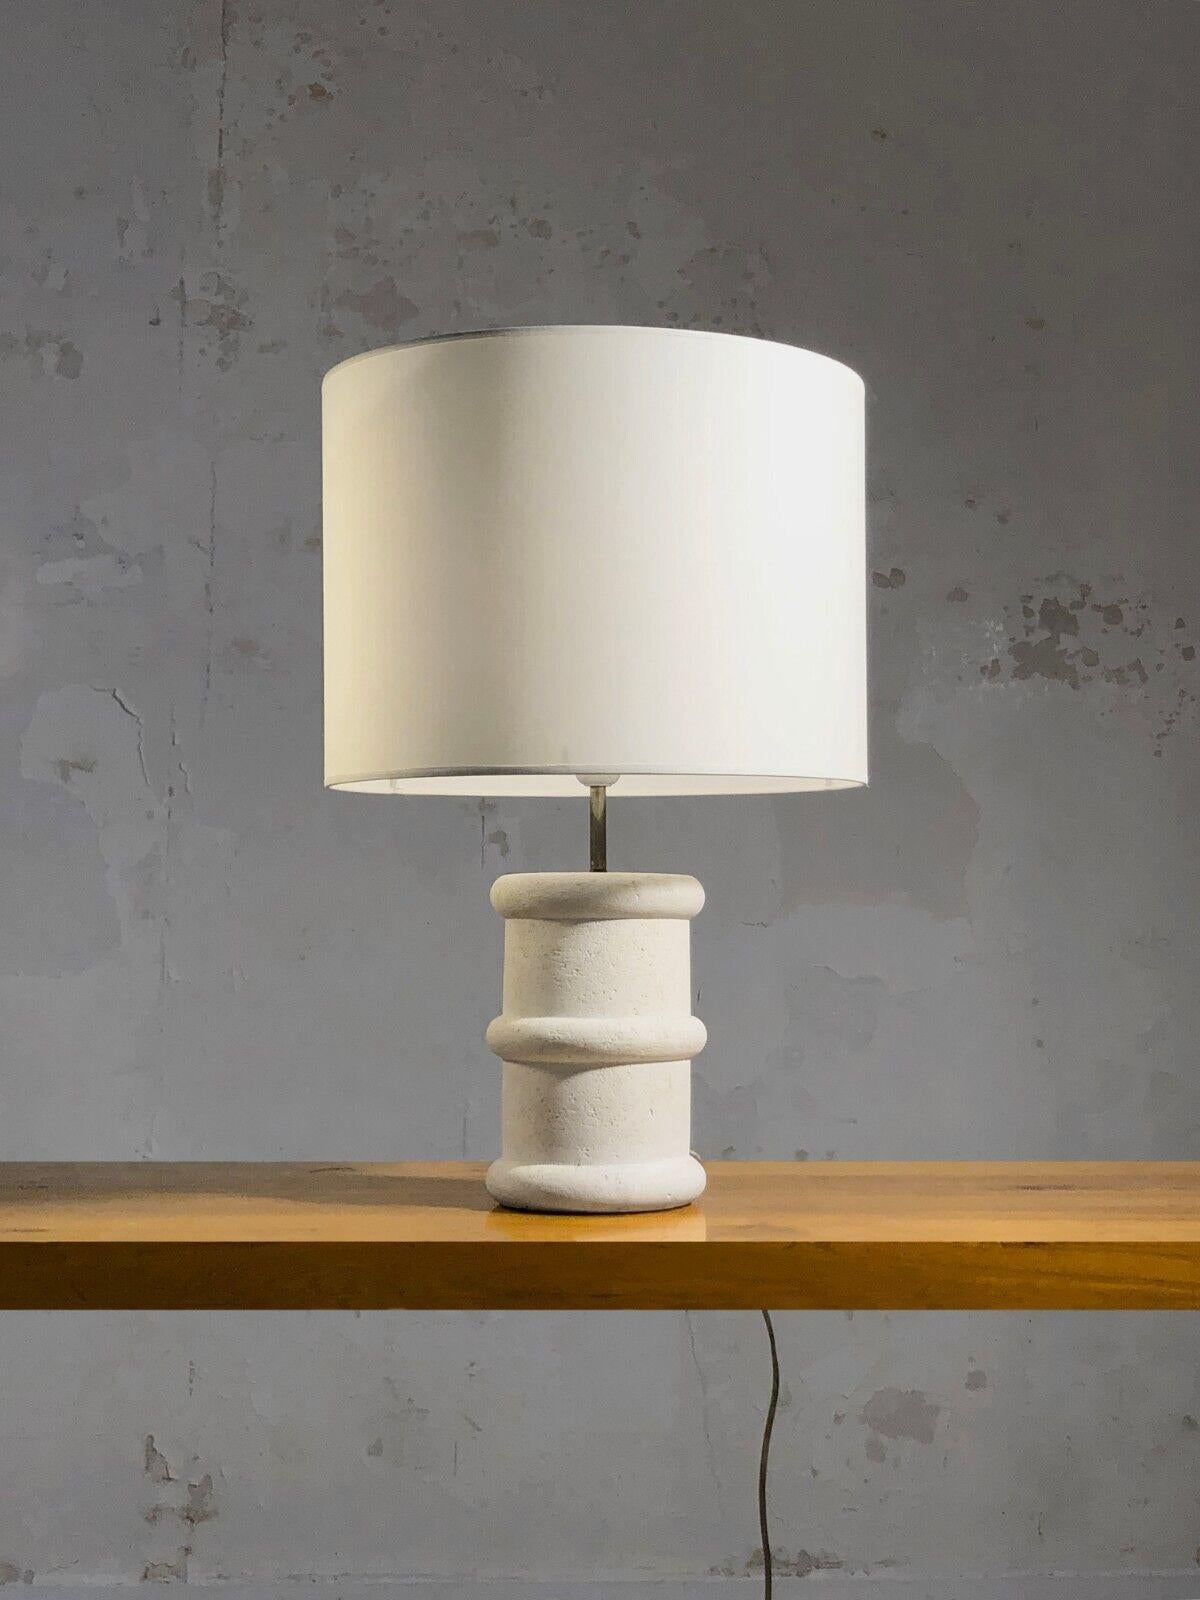 A beautiful floor or table lamp, Modernist, Free-Form, Brutalist, Rustic-Modern, large cylindrical base with 3 rings in natural Périgord stone, in the spirit of Albert Tormos, signed Hergey Limoges, France 1970.

DIMENSIONS: H 61 x D 40 cm with